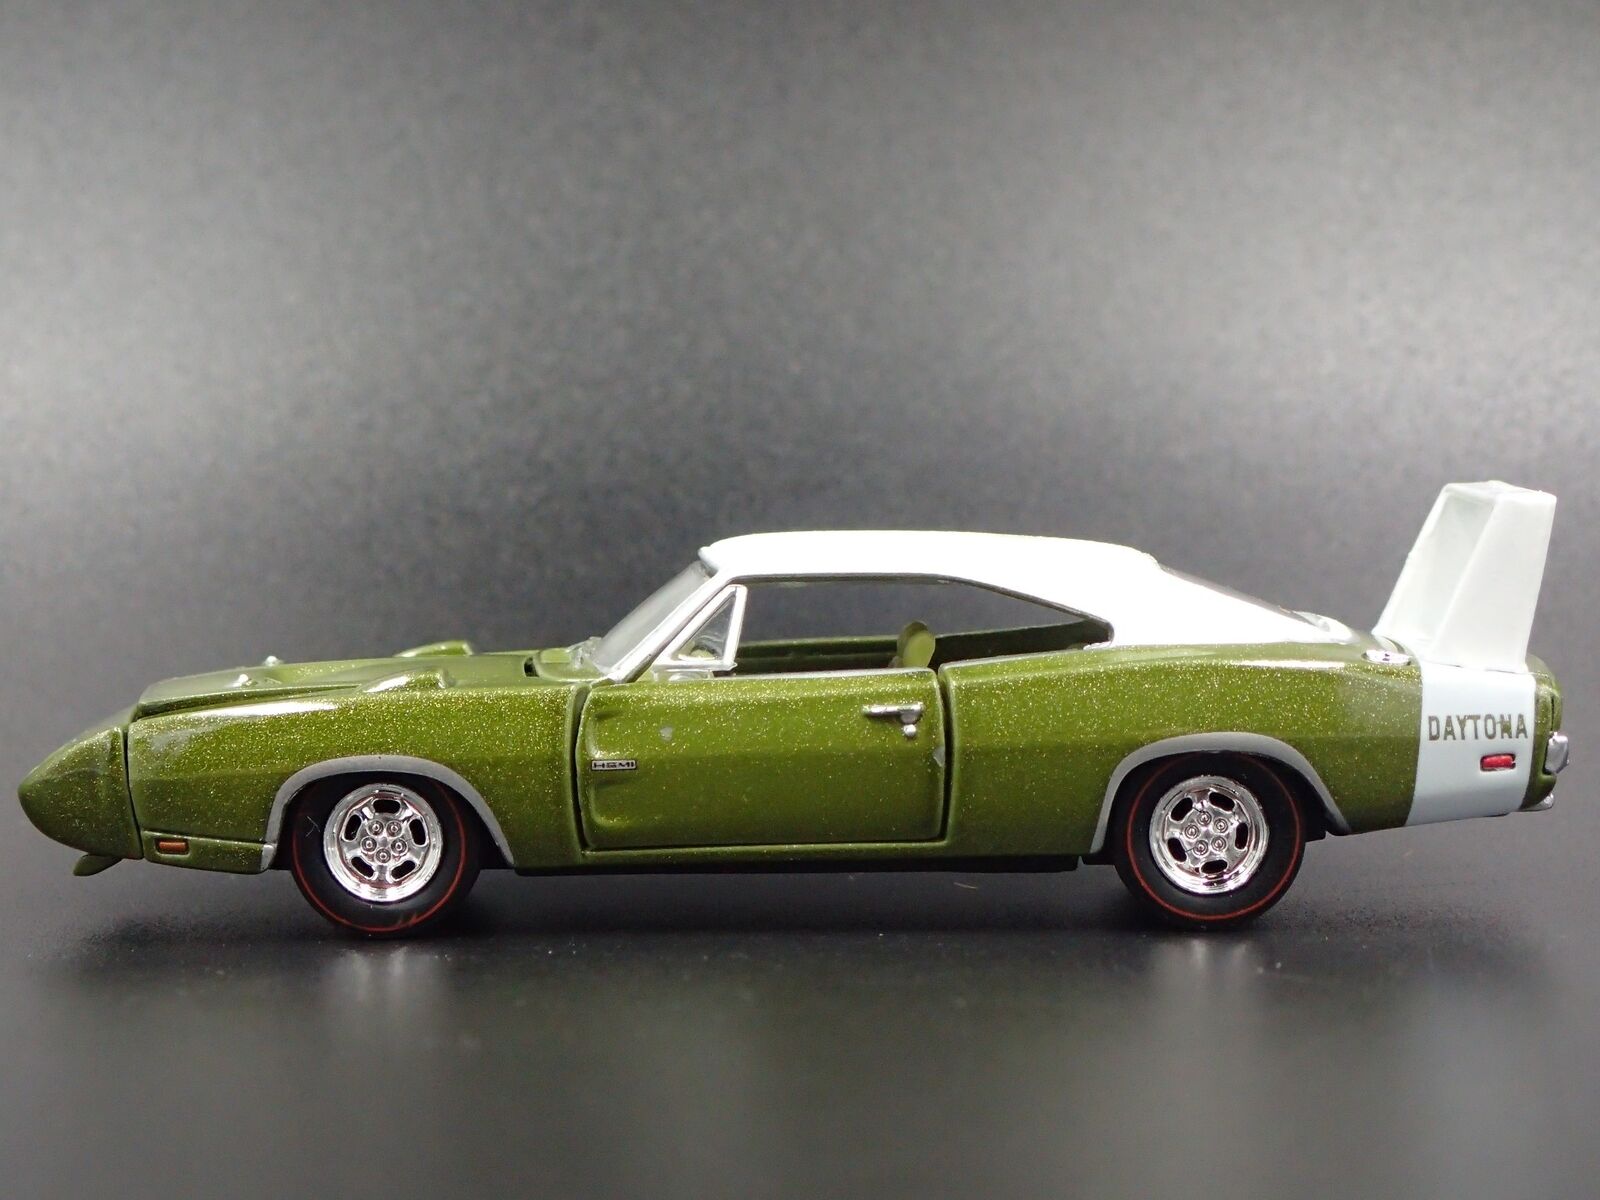 1969 69 DODGE CHARGER DAYTONA 1:64 SCALE COLLECTIBLE DIORAMA DIECAST MODEL CAR